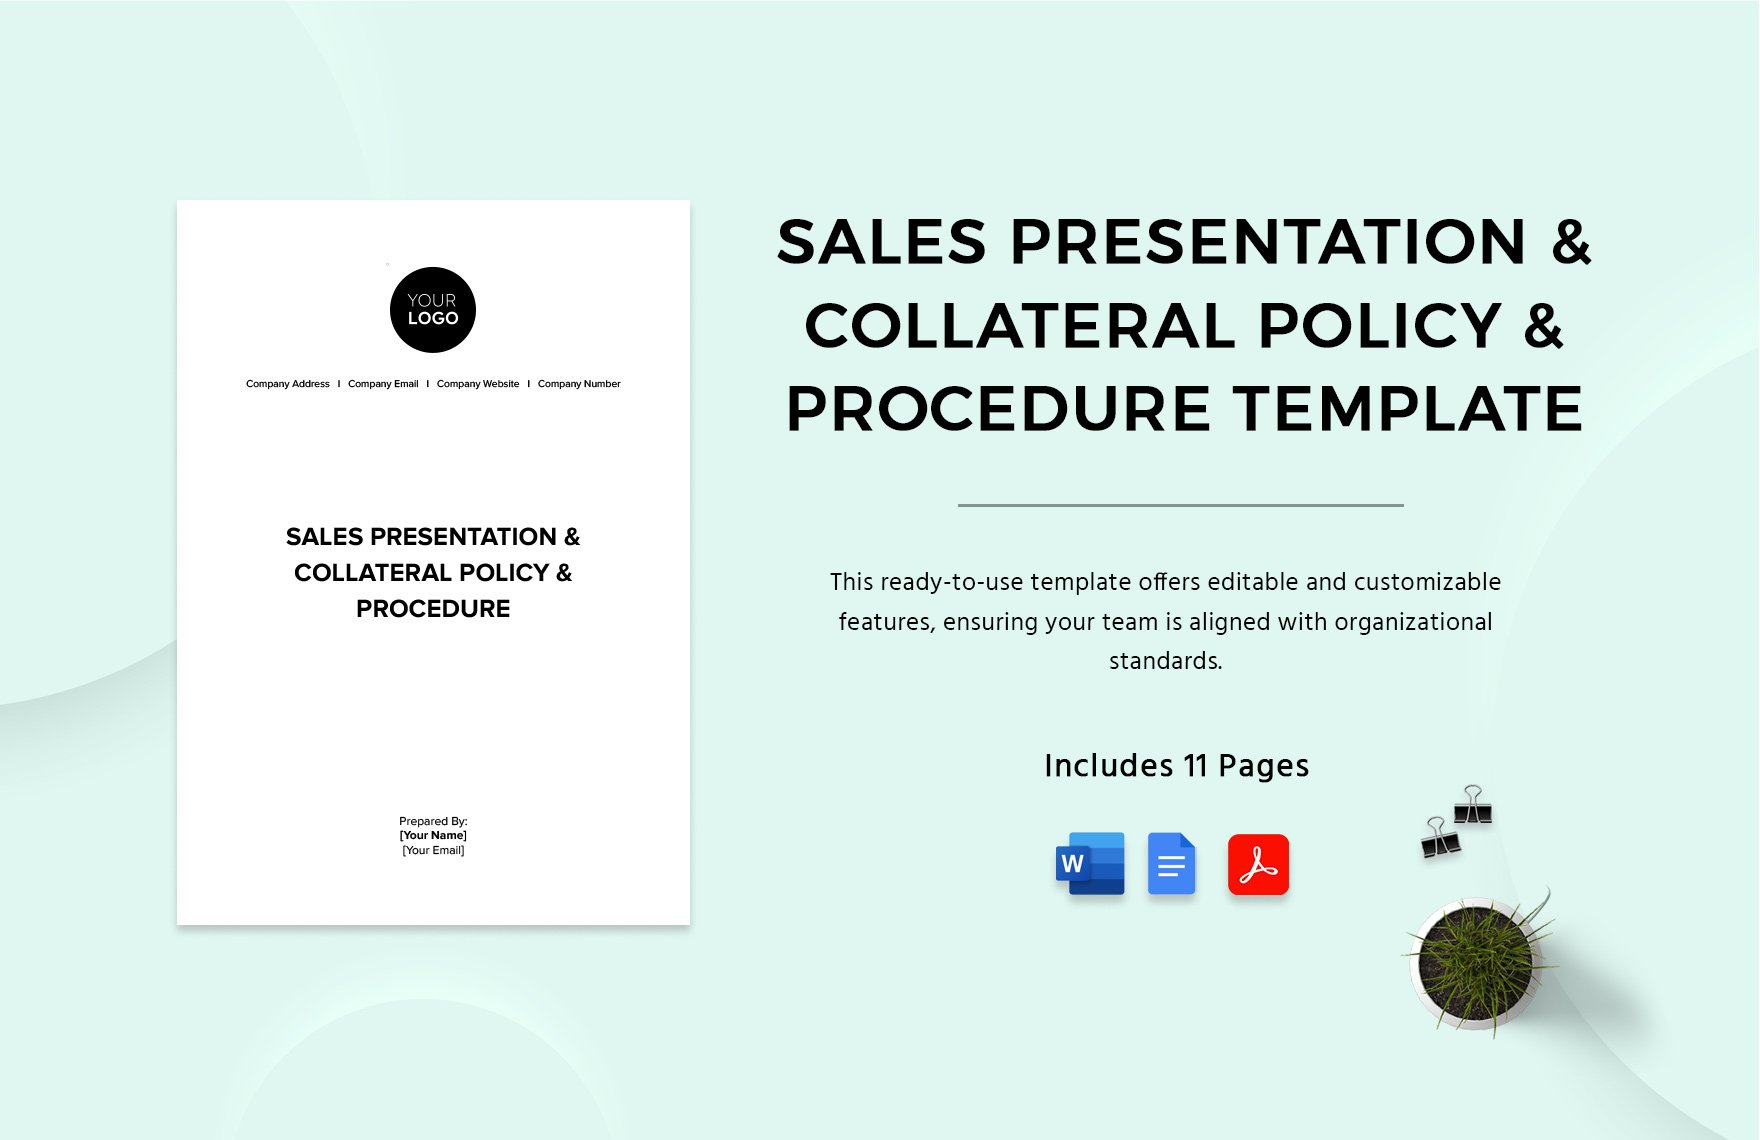 Sales Presentation & Collateral Policy & Procedure Template